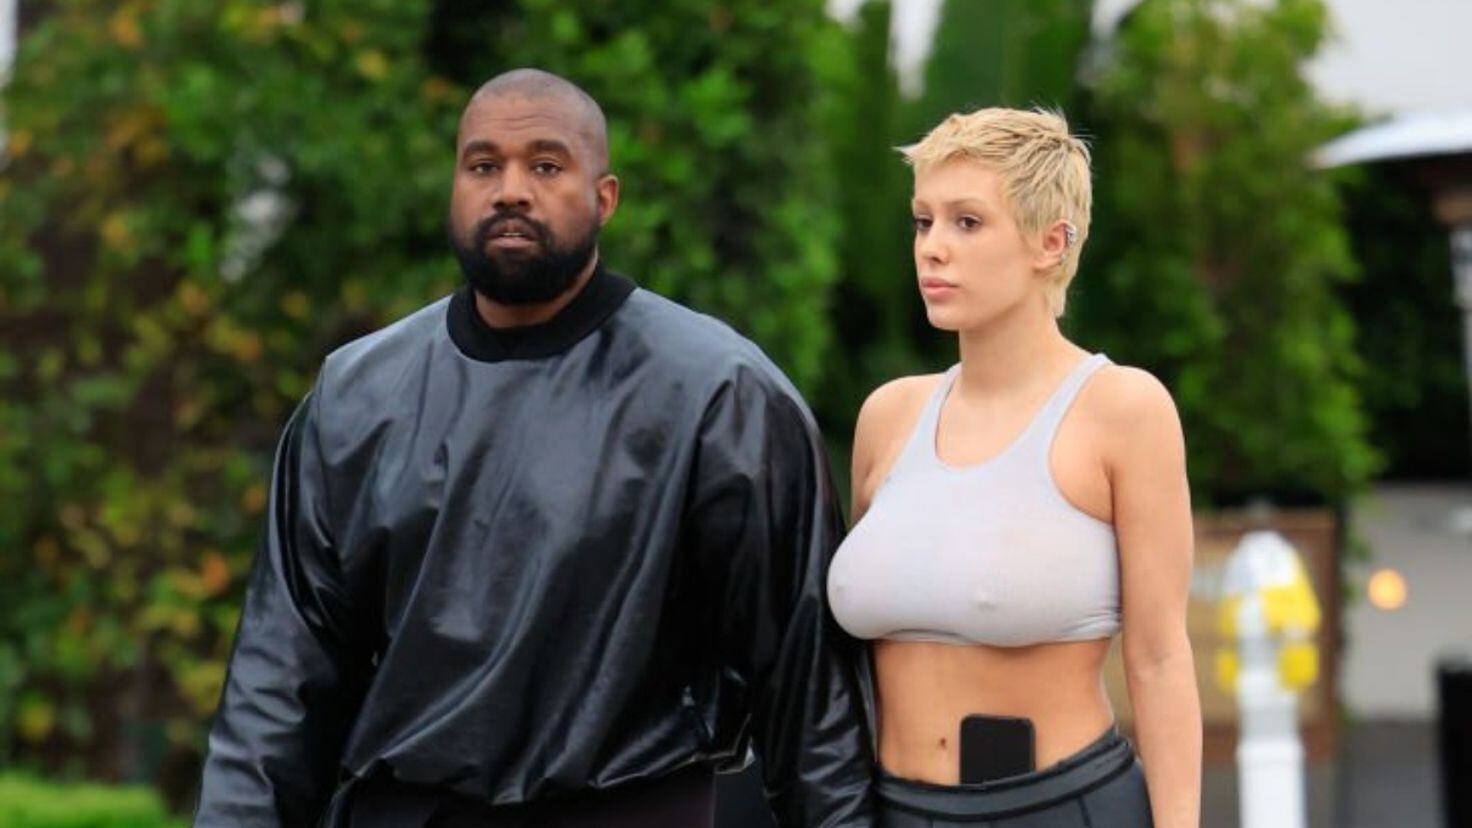 Kanye West reappears with his new wife, Bianca Sensory